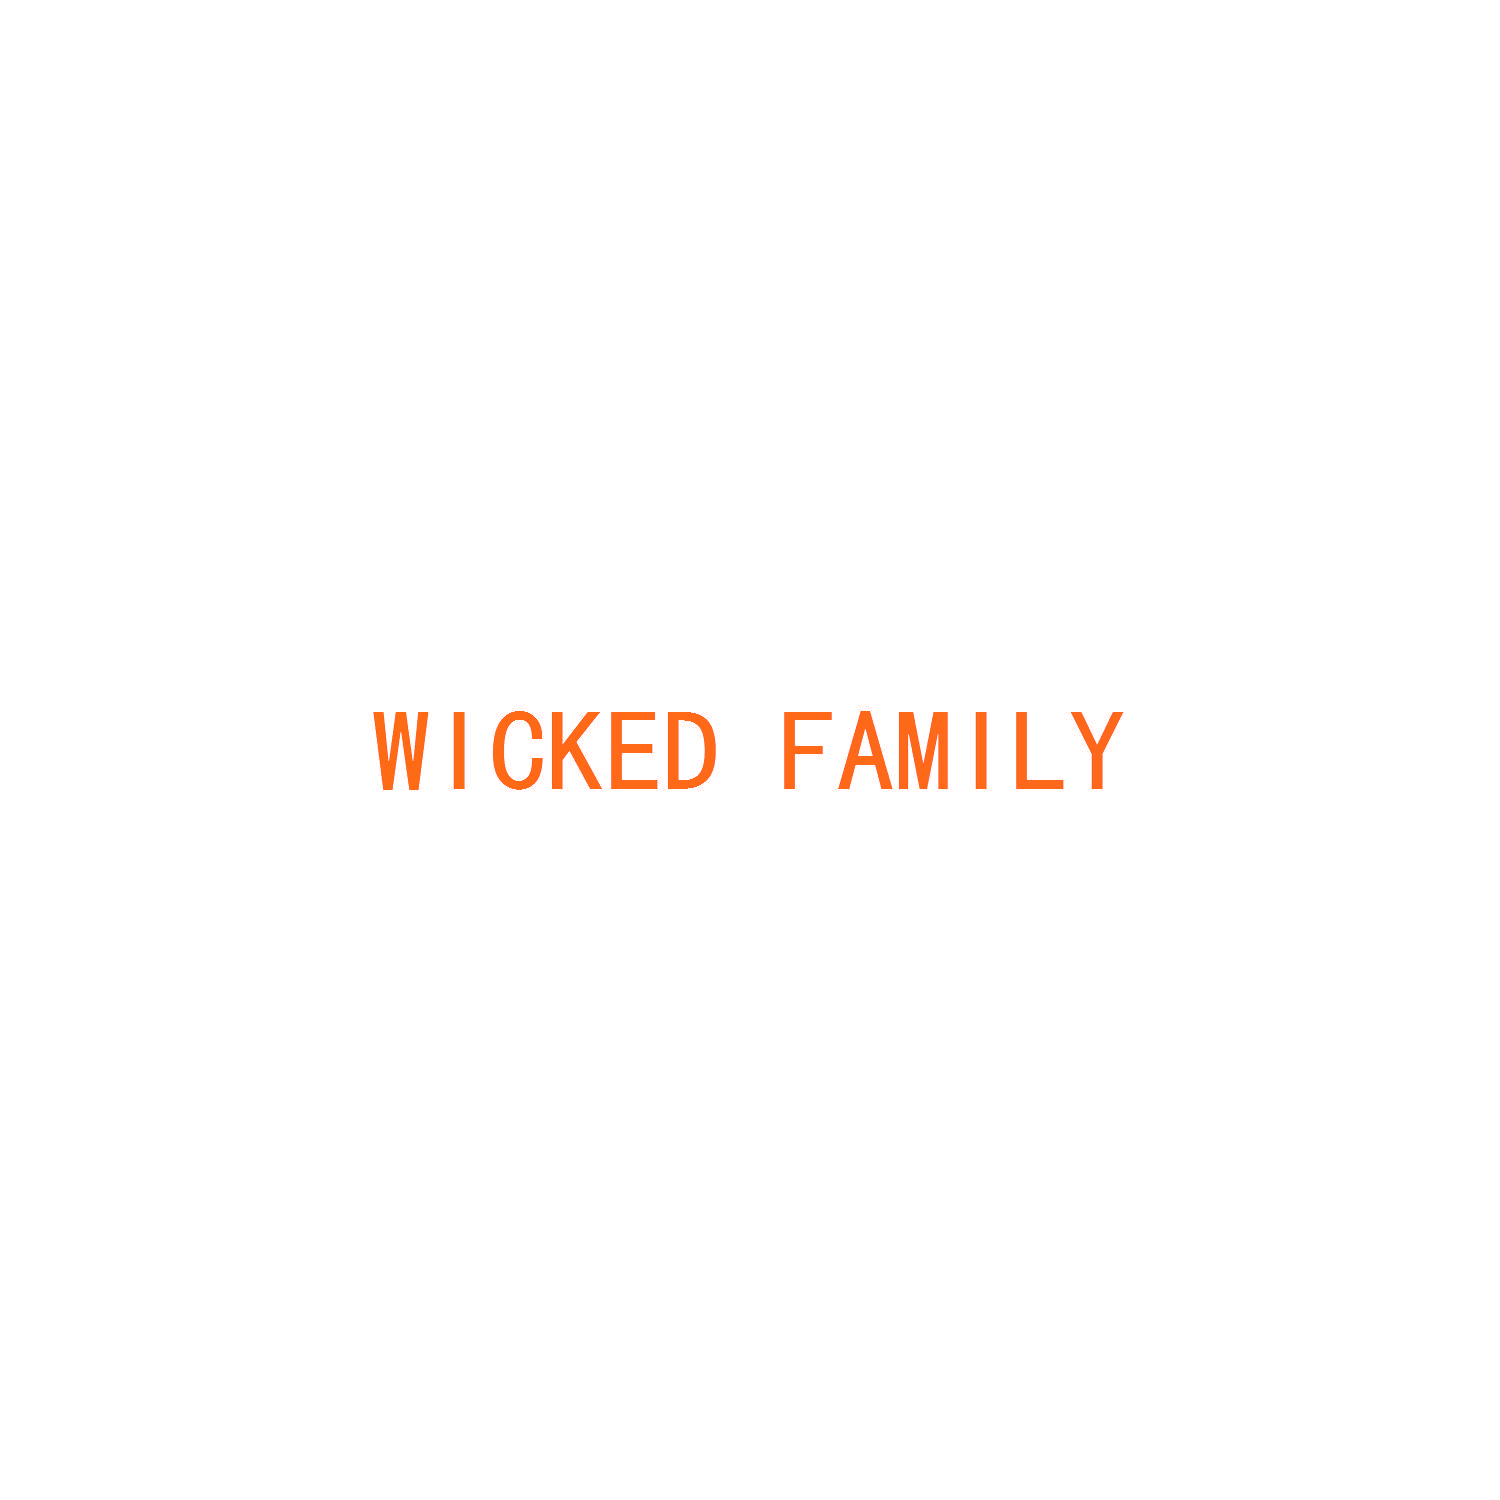 WICKED FAMILY